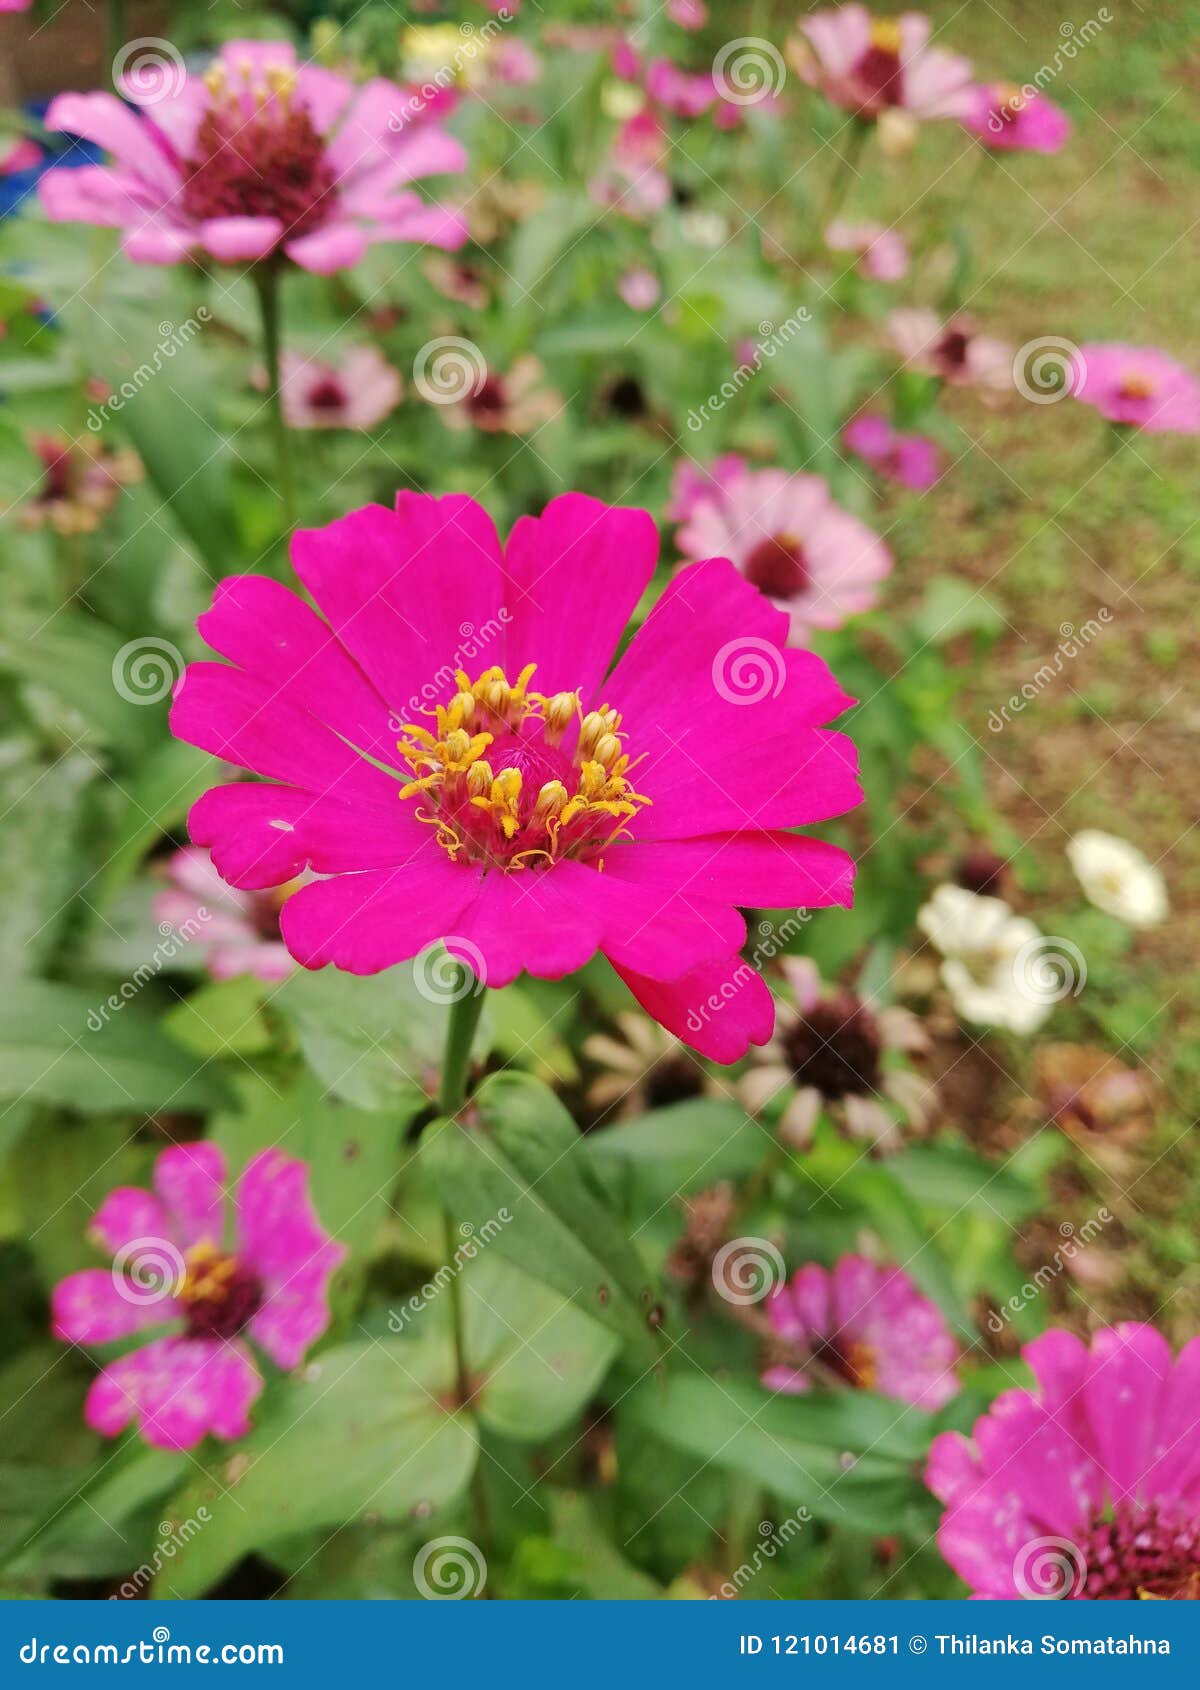 List 104+ Images pink flower with lots of petals Excellent